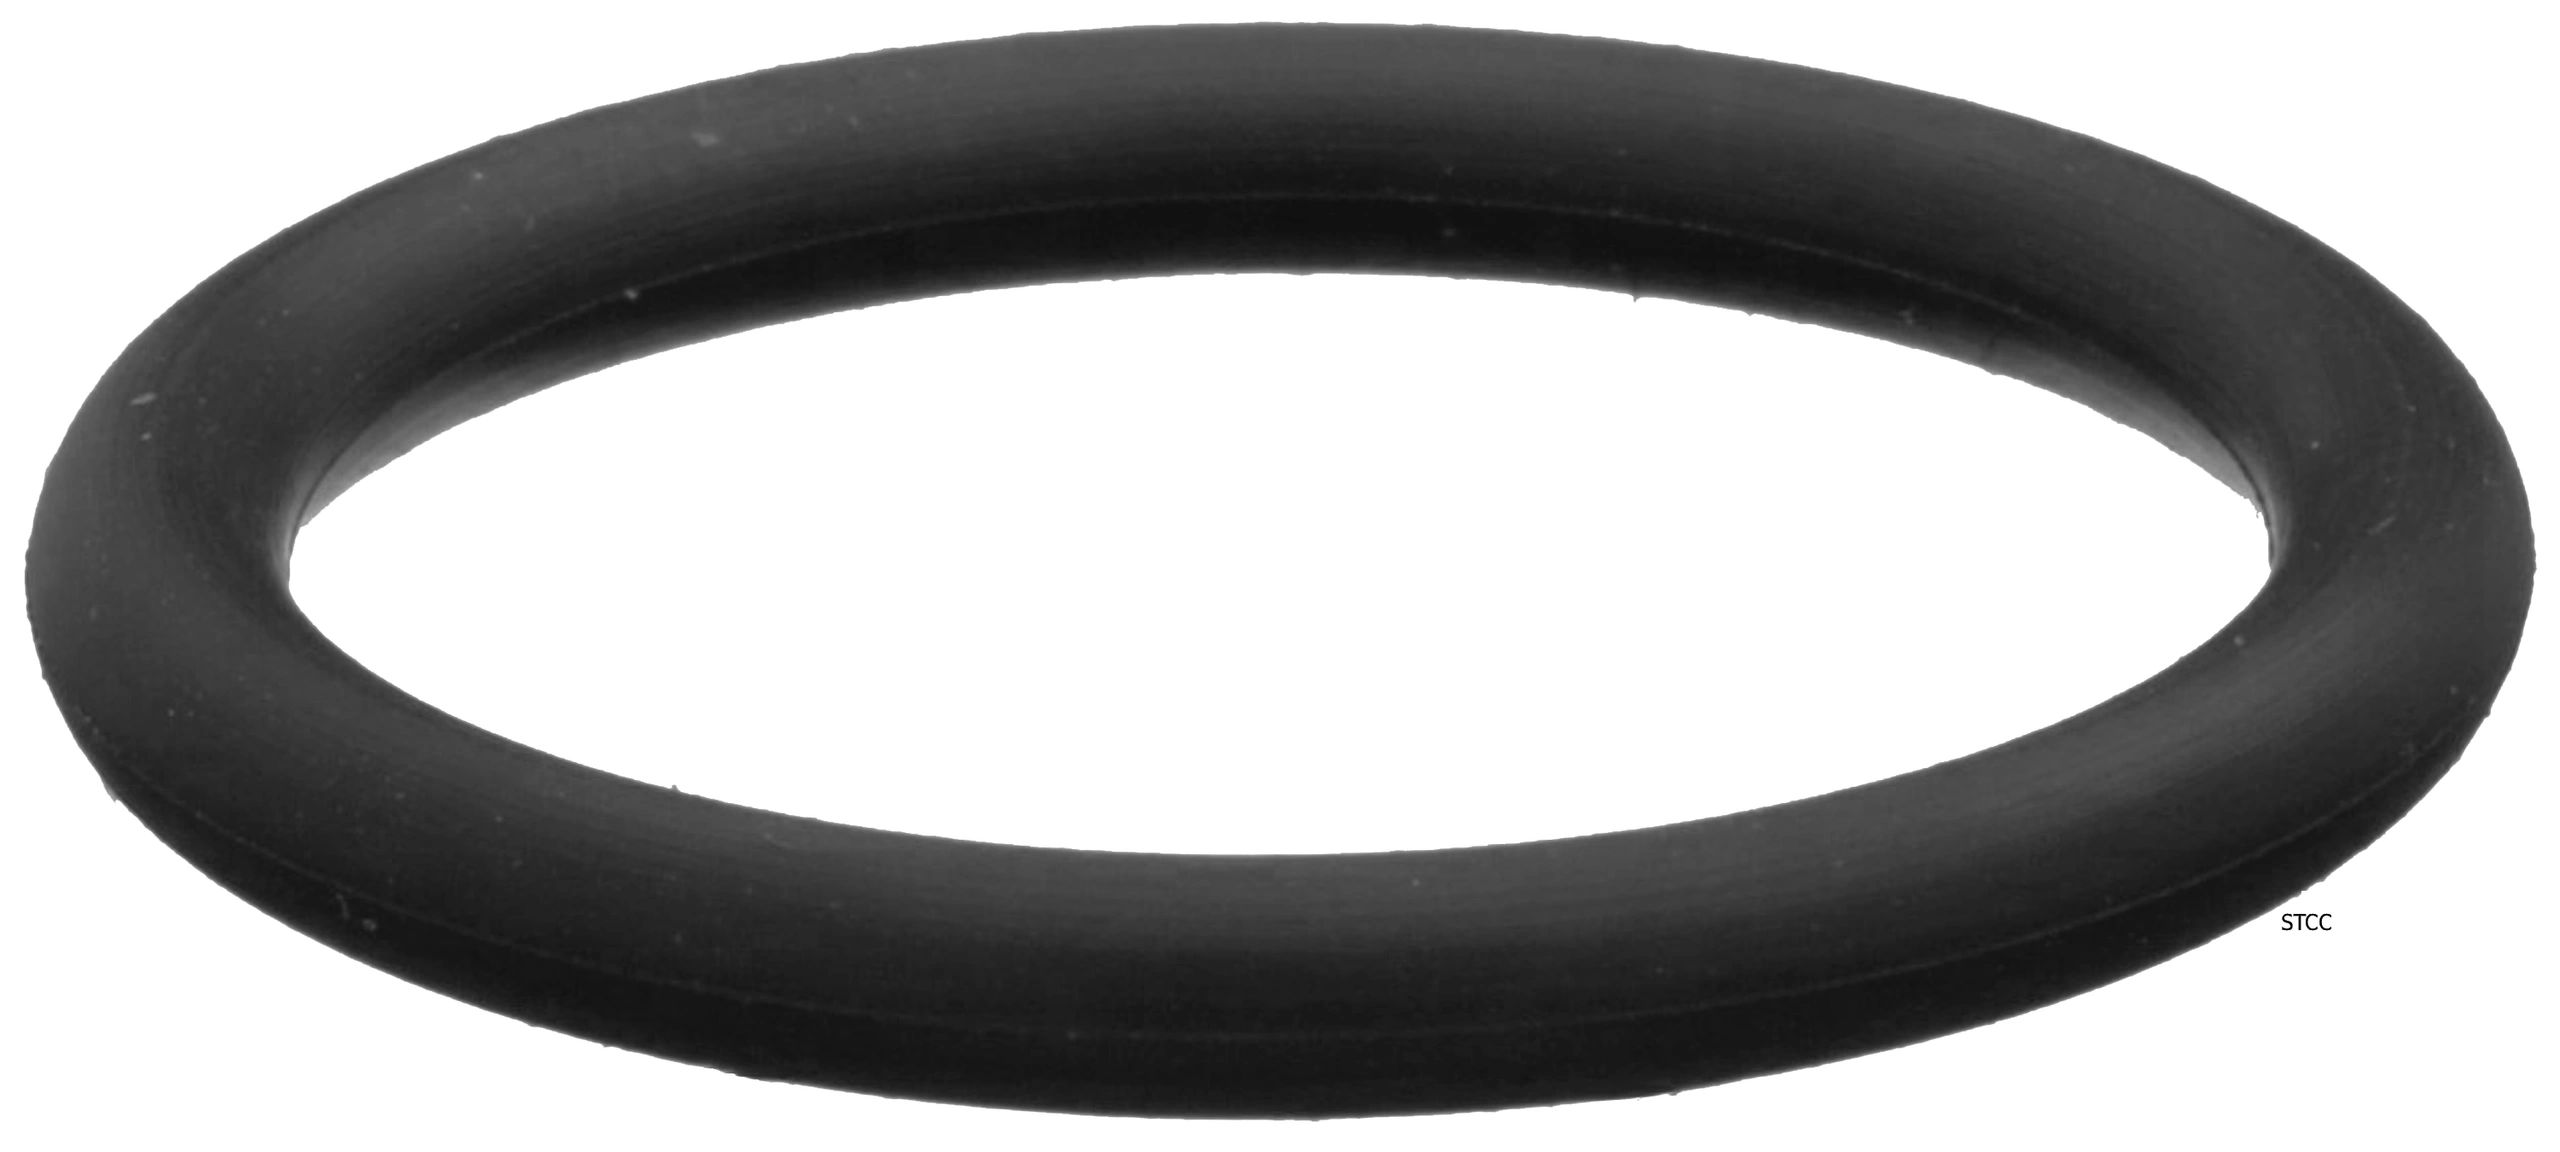 Neoprene Rubber 1/16 Thick Pack of 10 Pressure Class 300# Sterling Seal CFF7106.500.062.300X10 7106 60 Durometer Full Face Gasket 0.84 ID 1/2 Pipe Size 